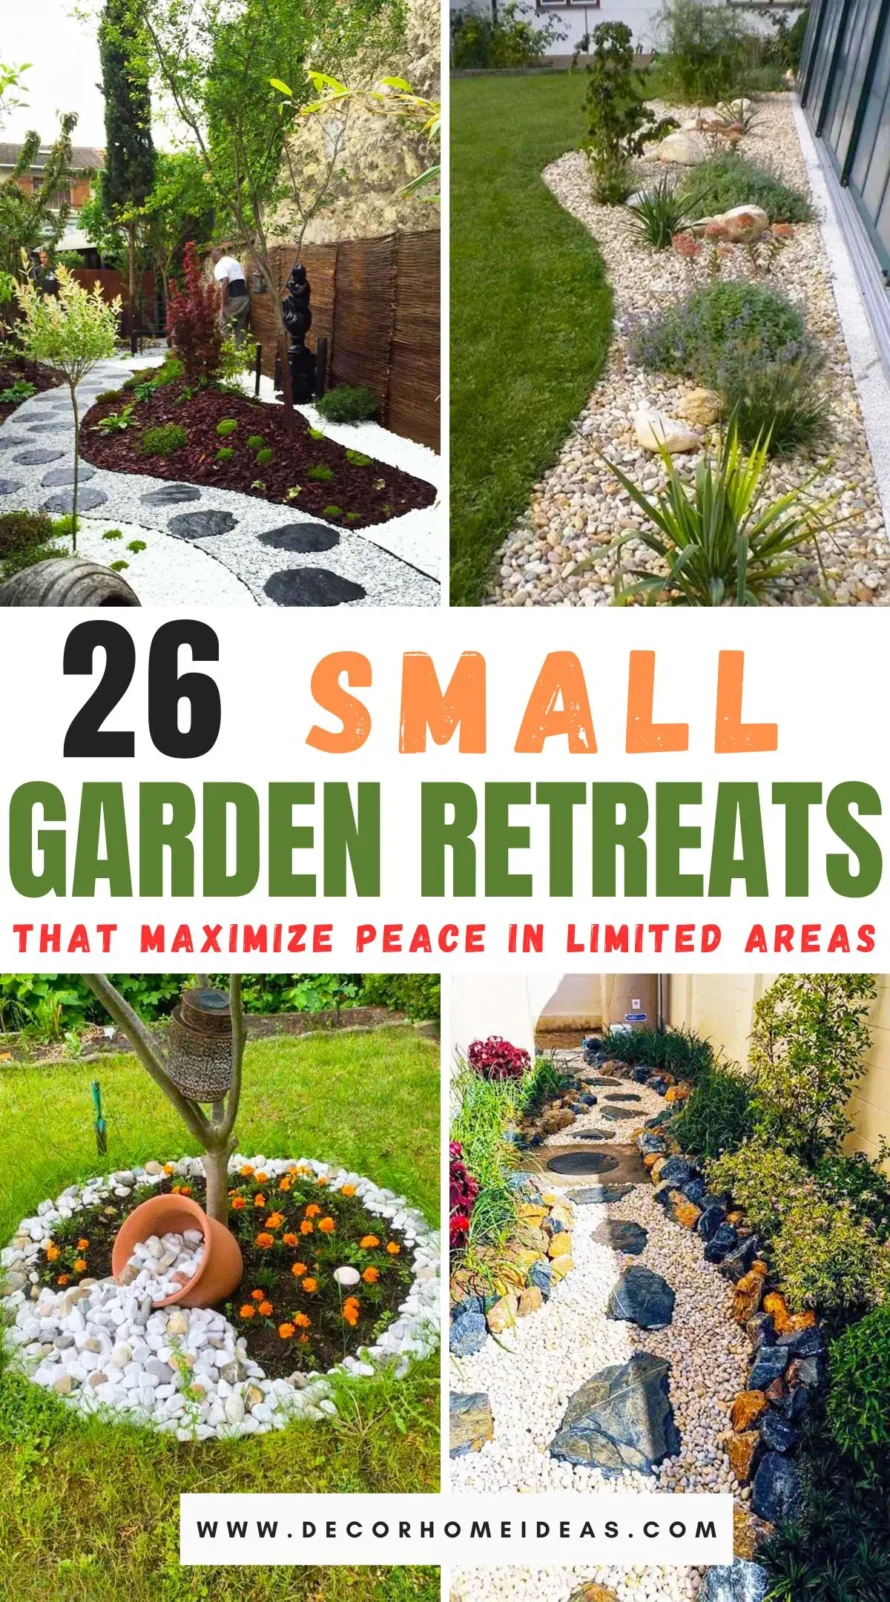 Explore 26 creative garden ideas tailored for small spaces that promise a serene escape. Find out how to transform your limited area into a peaceful retreat with clever designs and strategic plant choices, perfect for urban dwellers looking to add a touch of tranquility.